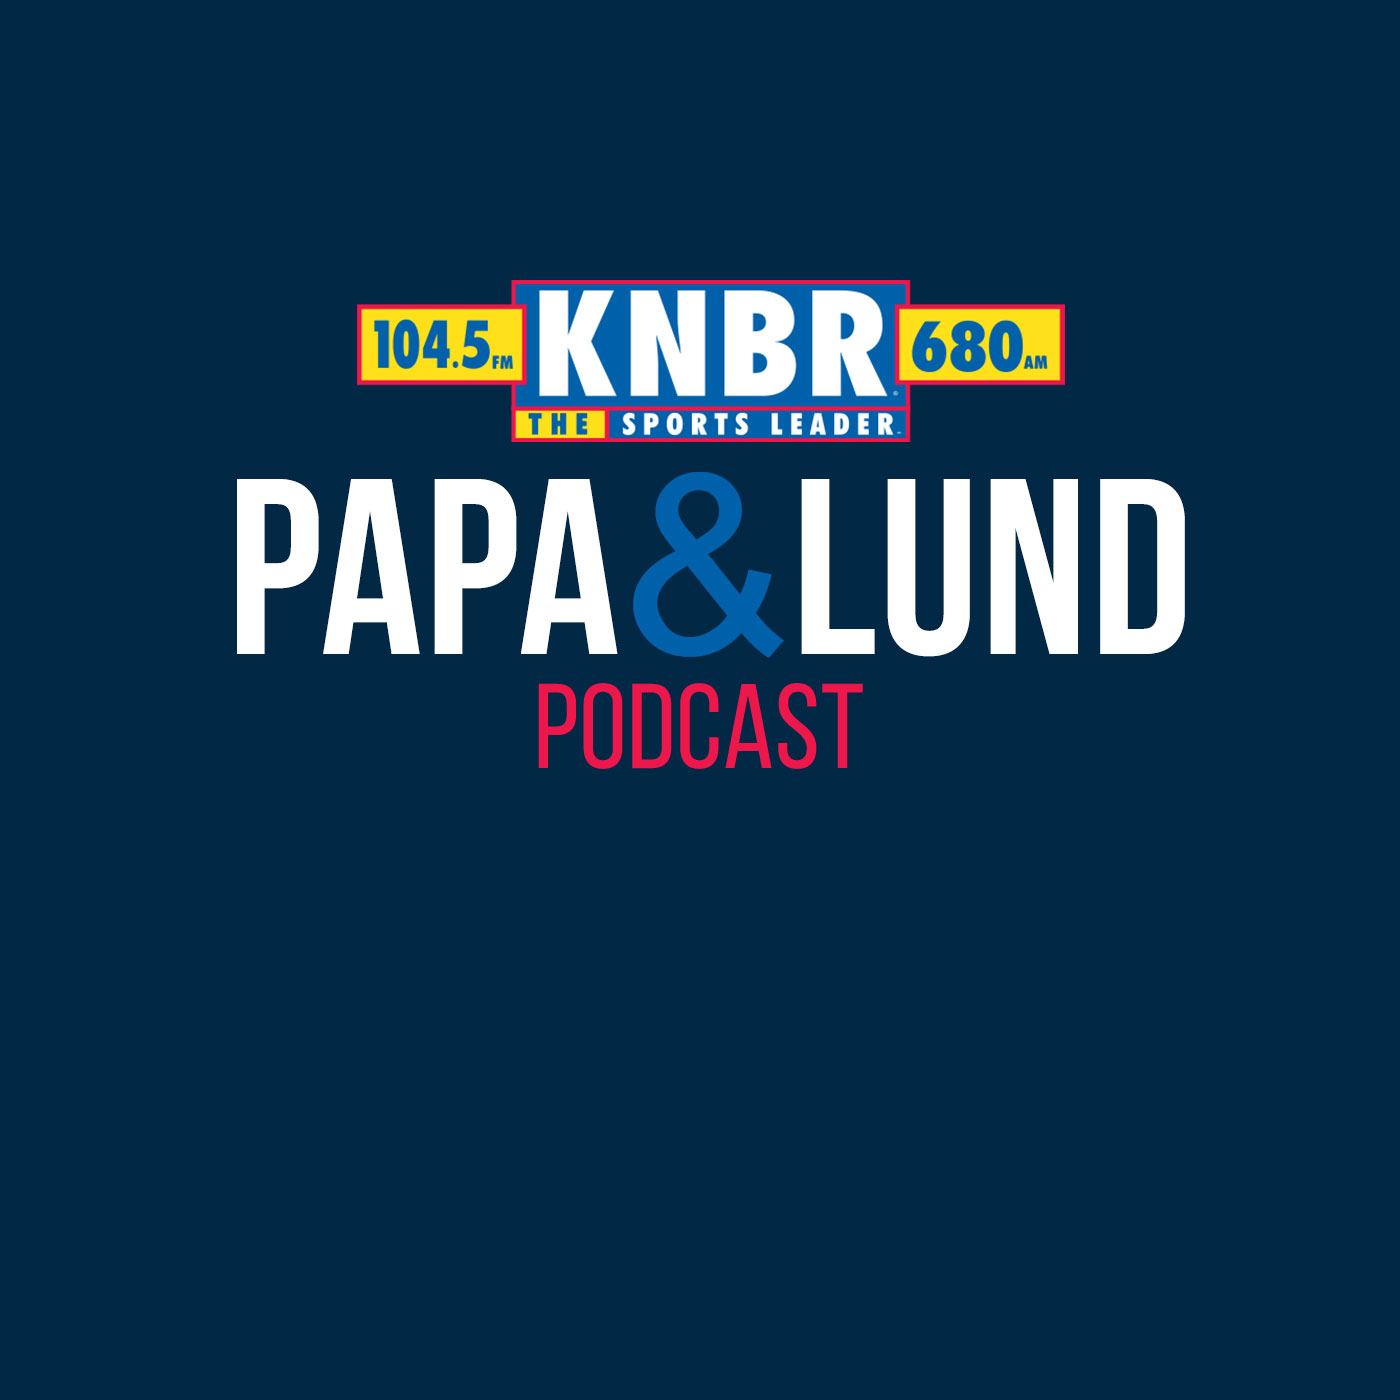 12-03 Eddie Johnson joins Papa & Copes to preview round two between the Warriors and Suns